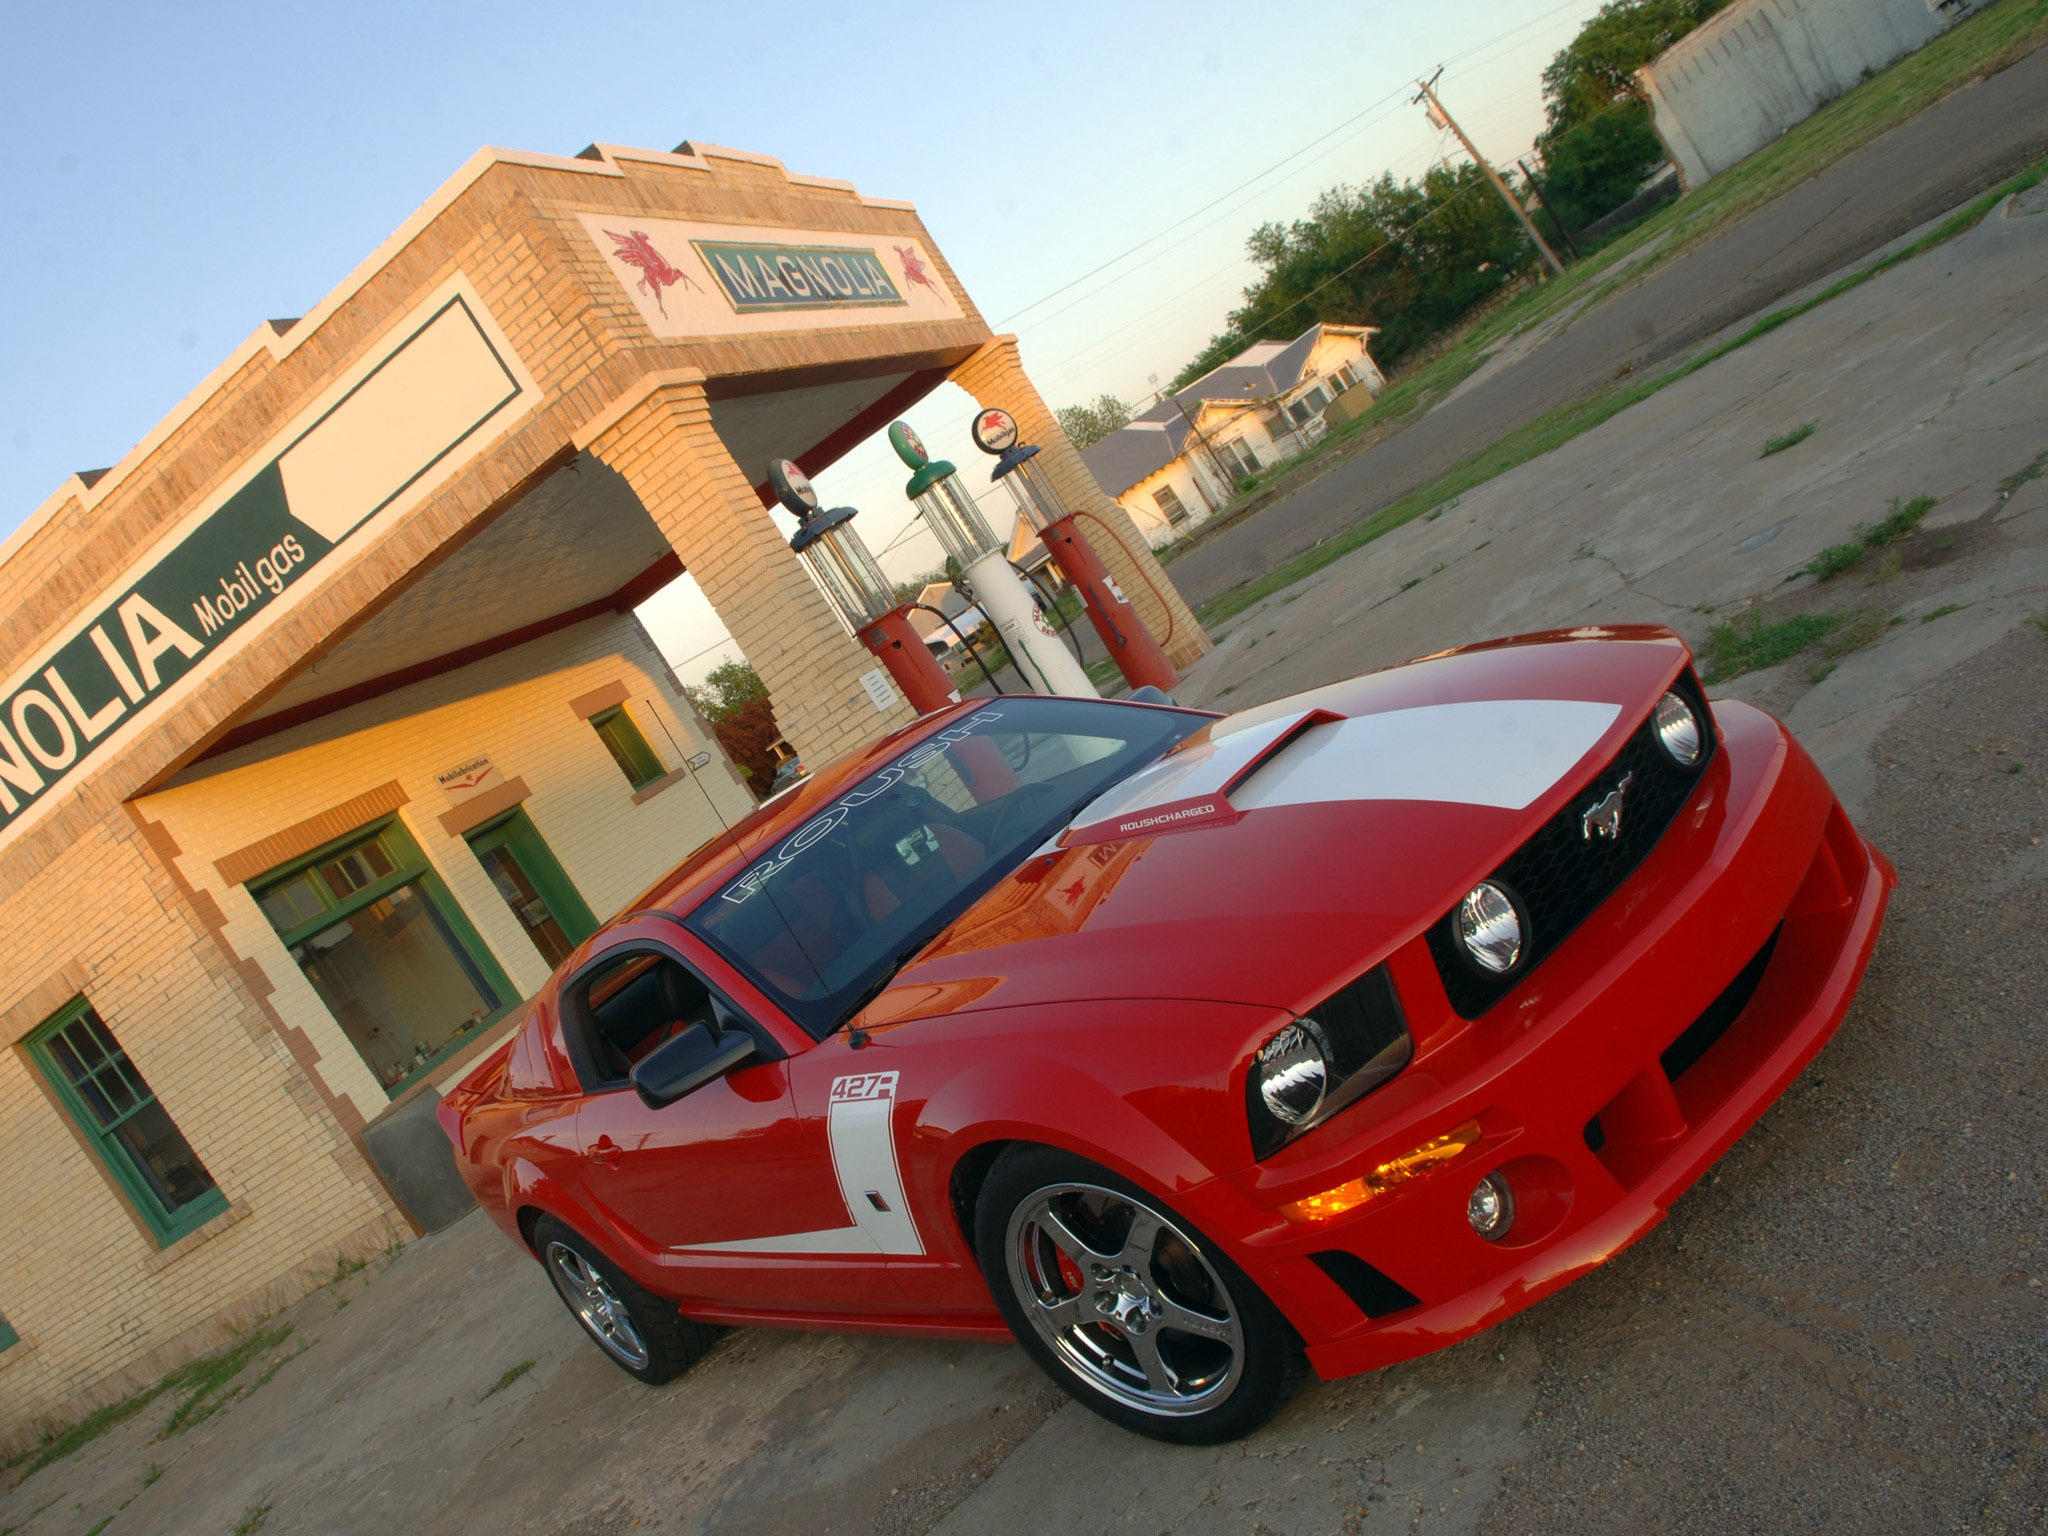 2009, Roush, Ford, Mustang, 427r, Muscle, Tuning, Hot, Rod, Rods Wallpaper